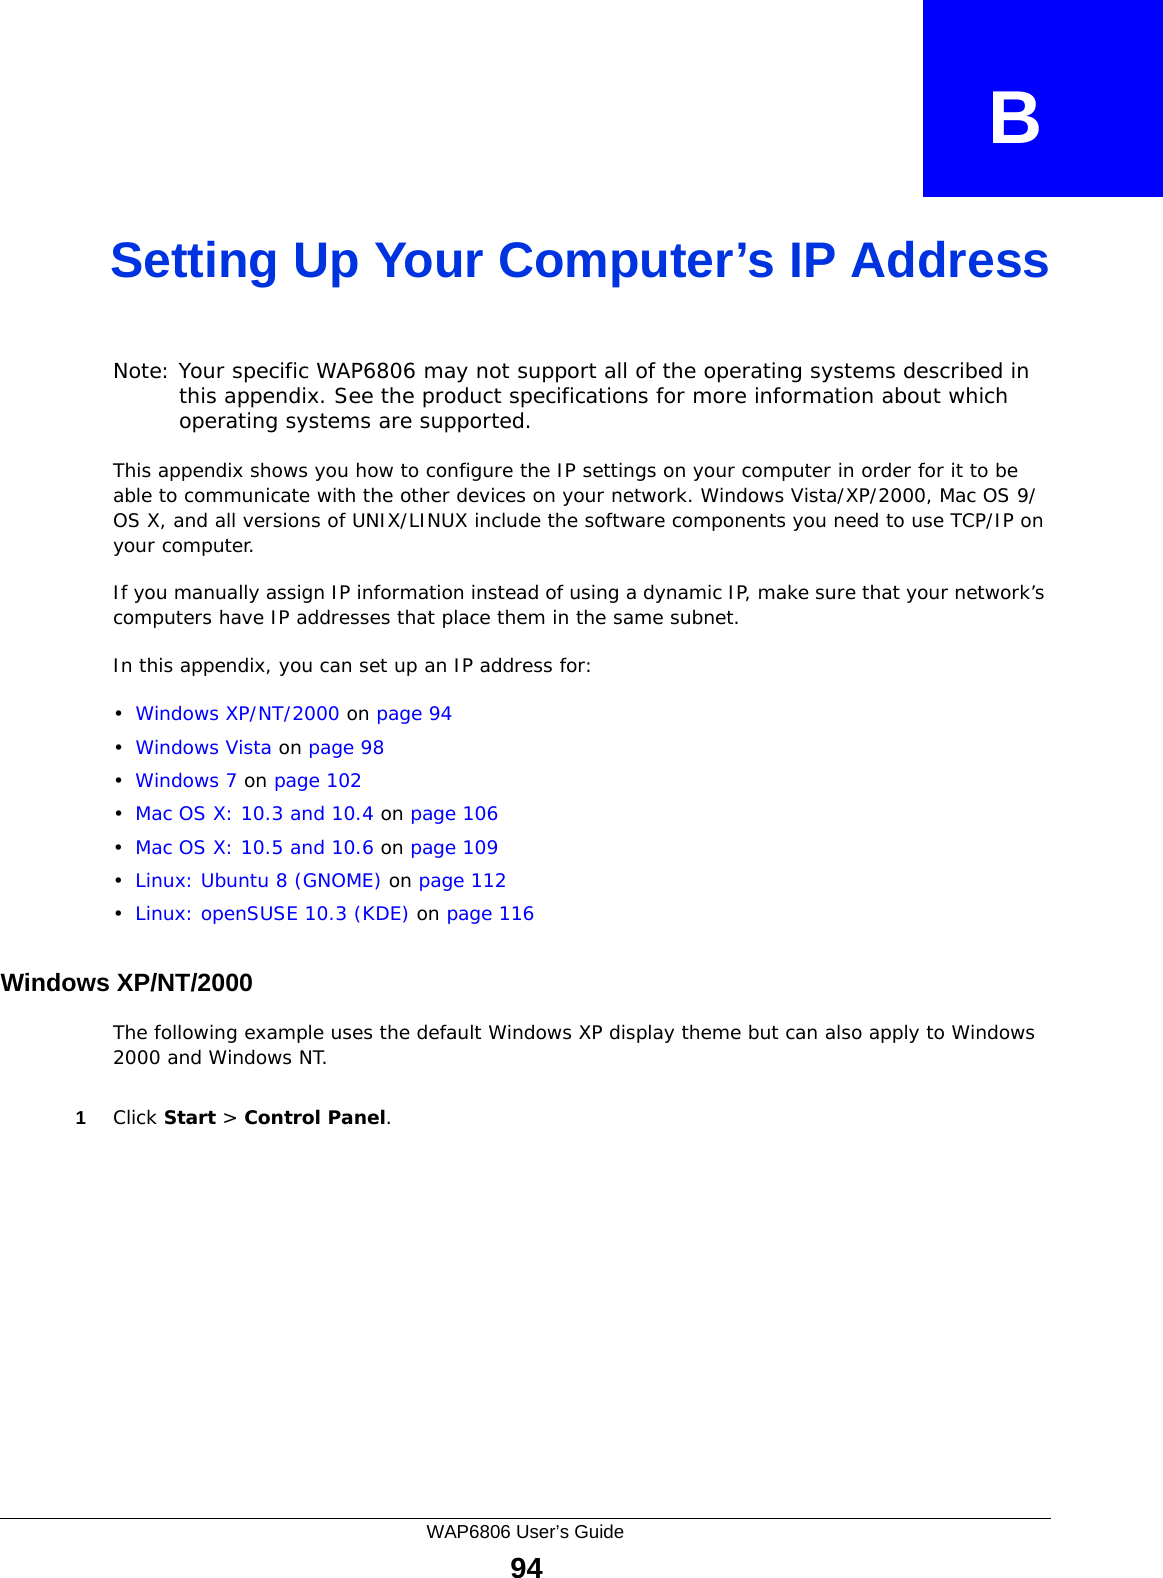 WAP6806 User’s Guide94APPENDIX   BSetting Up Your Computer’s IP AddressNote: Your specific WAP6806 may not support all of the operating systems described in this appendix. See the product specifications for more information about which operating systems are supported.This appendix shows you how to configure the IP settings on your computer in order for it to be able to communicate with the other devices on your network. Windows Vista/XP/2000, Mac OS 9/OS X, and all versions of UNIX/LINUX include the software components you need to use TCP/IP on your computer. If you manually assign IP information instead of using a dynamic IP, make sure that your network’s computers have IP addresses that place them in the same subnet.In this appendix, you can set up an IP address for:•Windows XP/NT/2000 on page 94•Windows Vista on page 98•Windows 7 on page 102•Mac OS X: 10.3 and 10.4 on page 106•Mac OS X: 10.5 and 10.6 on page 109•Linux: Ubuntu 8 (GNOME) on page 112•Linux: openSUSE 10.3 (KDE) on page 116Windows XP/NT/2000The following example uses the default Windows XP display theme but can also apply to Windows 2000 and Windows NT.1Click Start &gt; Control Panel.